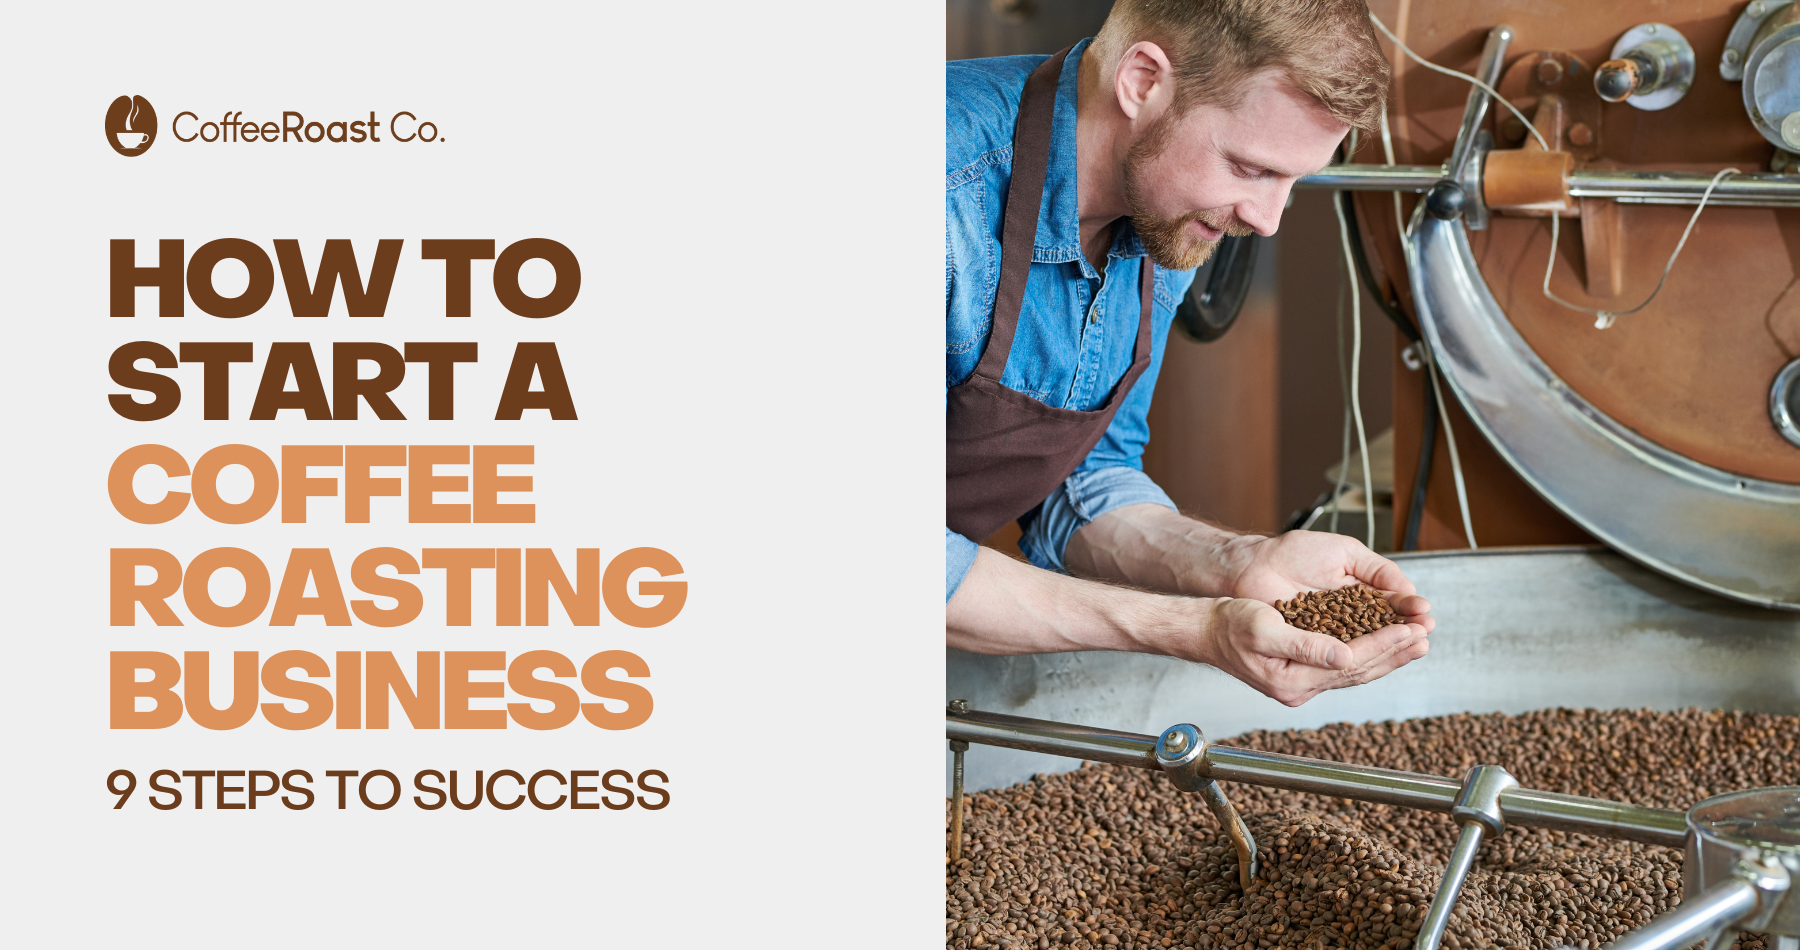 How to Start a Coffee Roasting Business - 9 Steps to Success!